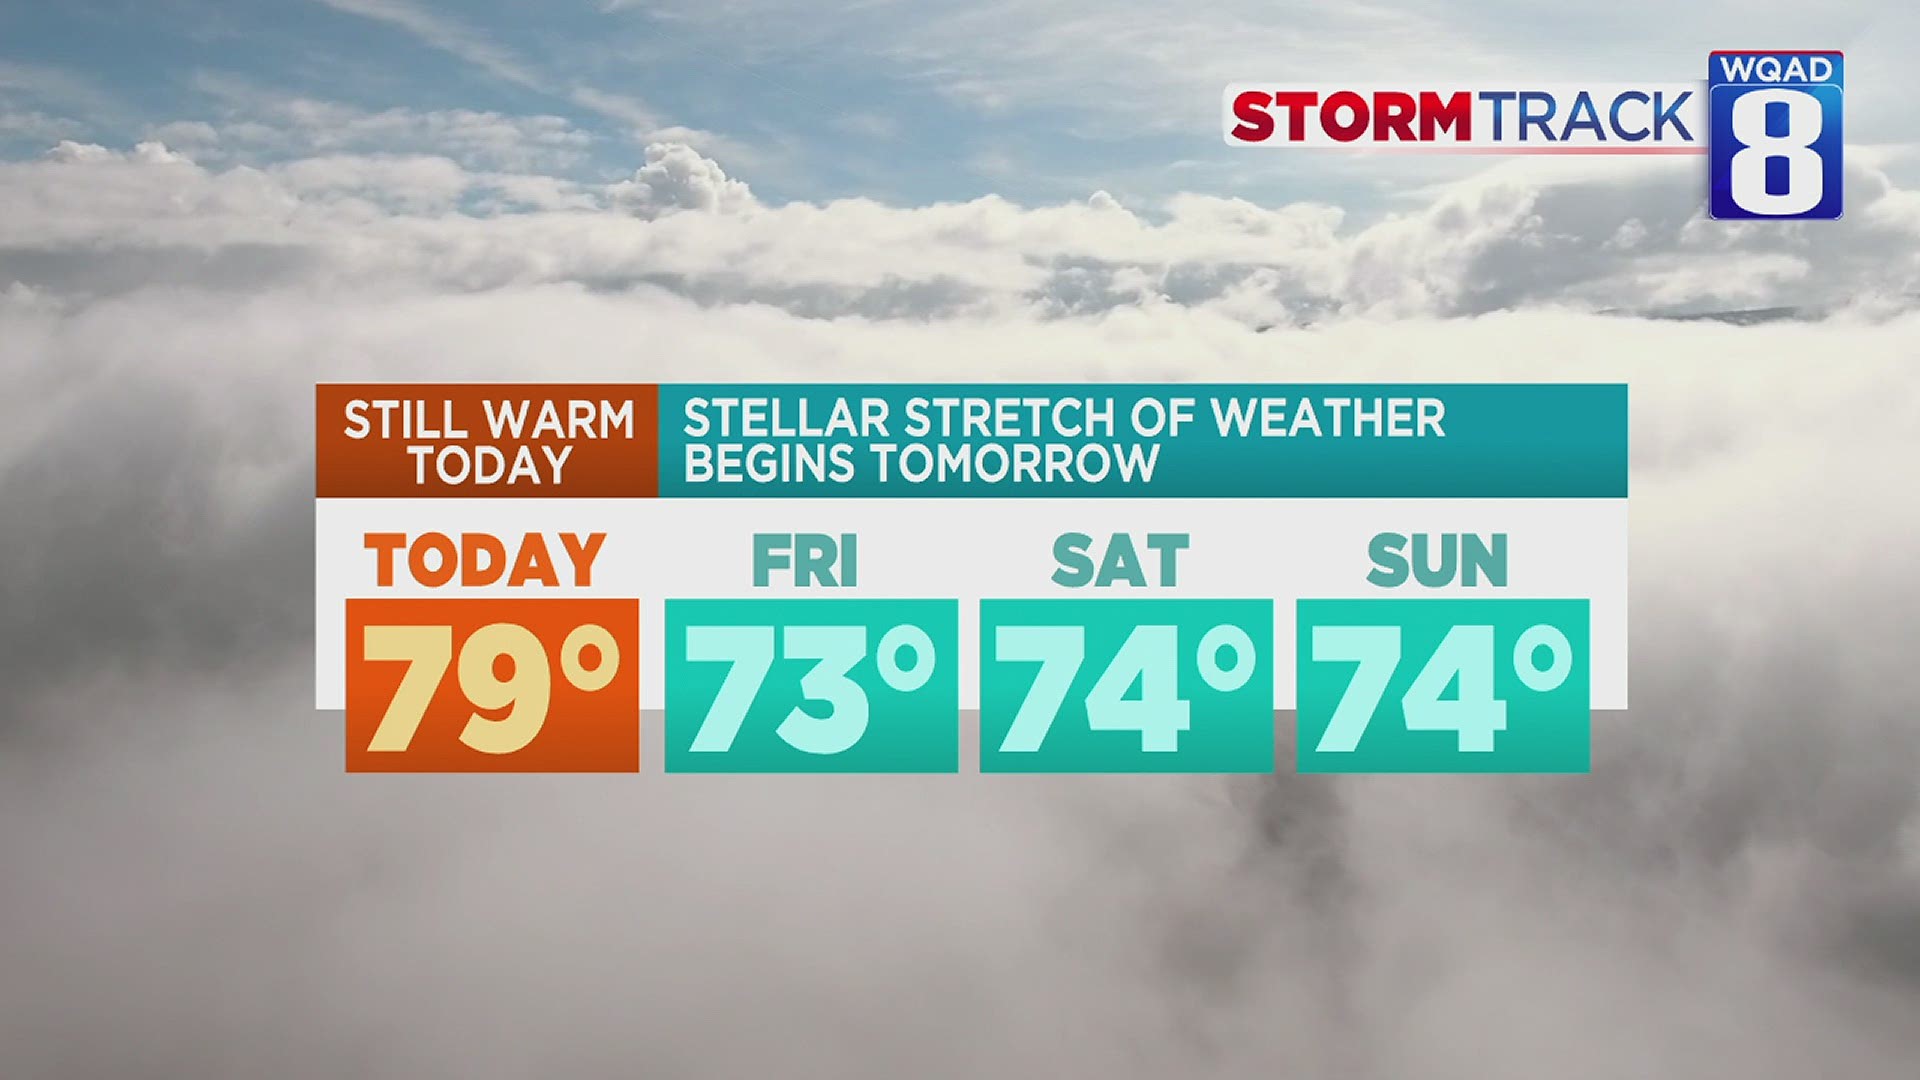 Warm and humid with increasing thunderstorms today. Beautiful for the weekend.